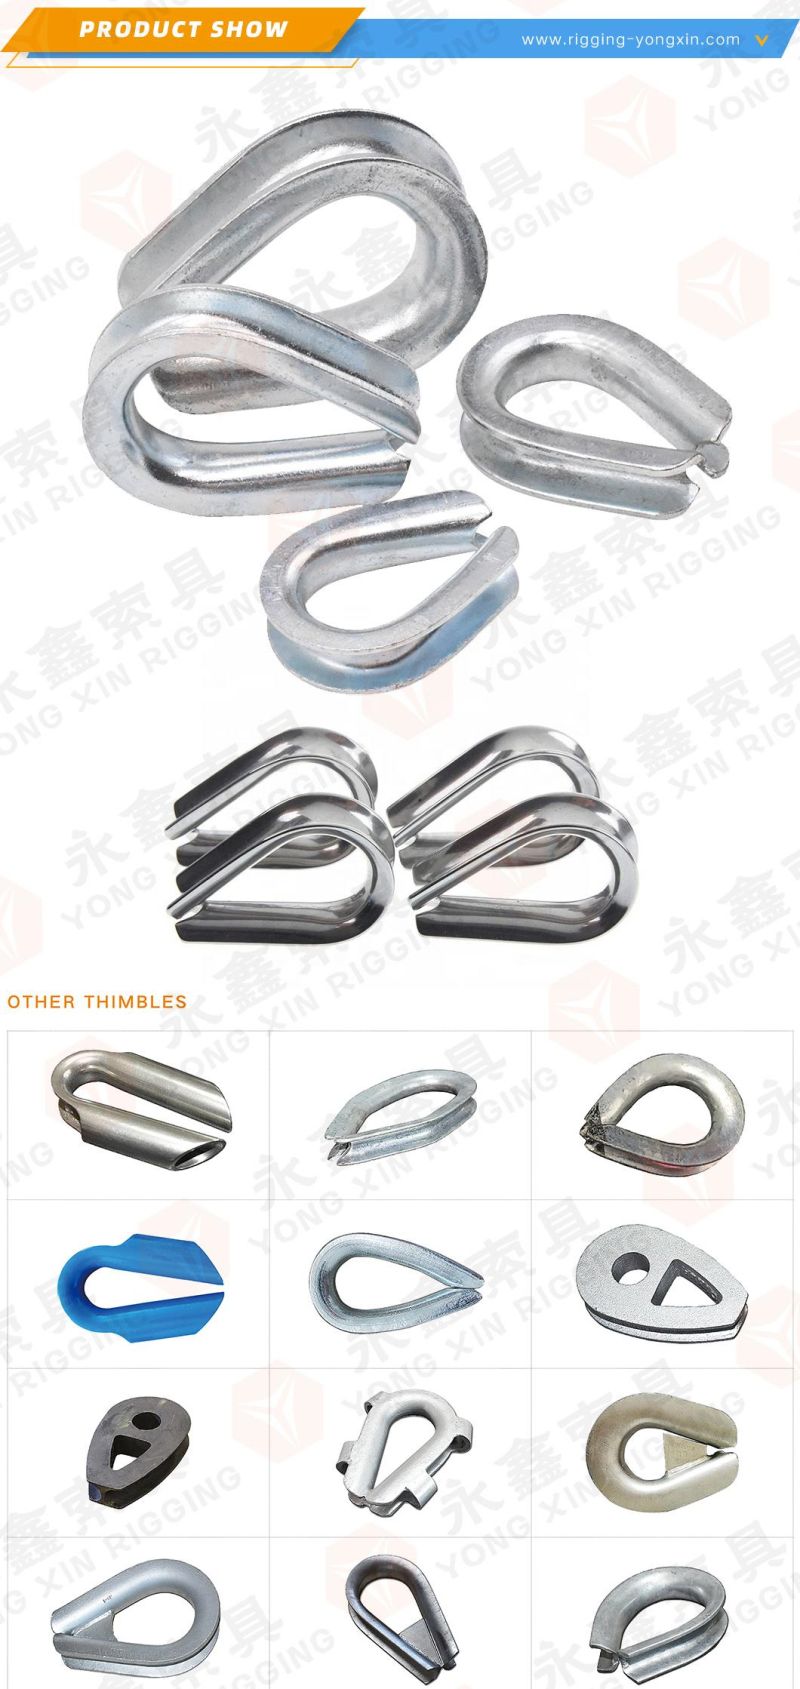 /4, 5/16, 3/8, 7/16, 1/2, 9/16, 5/8, 3/4, 7/8, 1, 1-1/8, 1-1/4, 1-3/8 ′′ Wire Rope Thimbles G 414